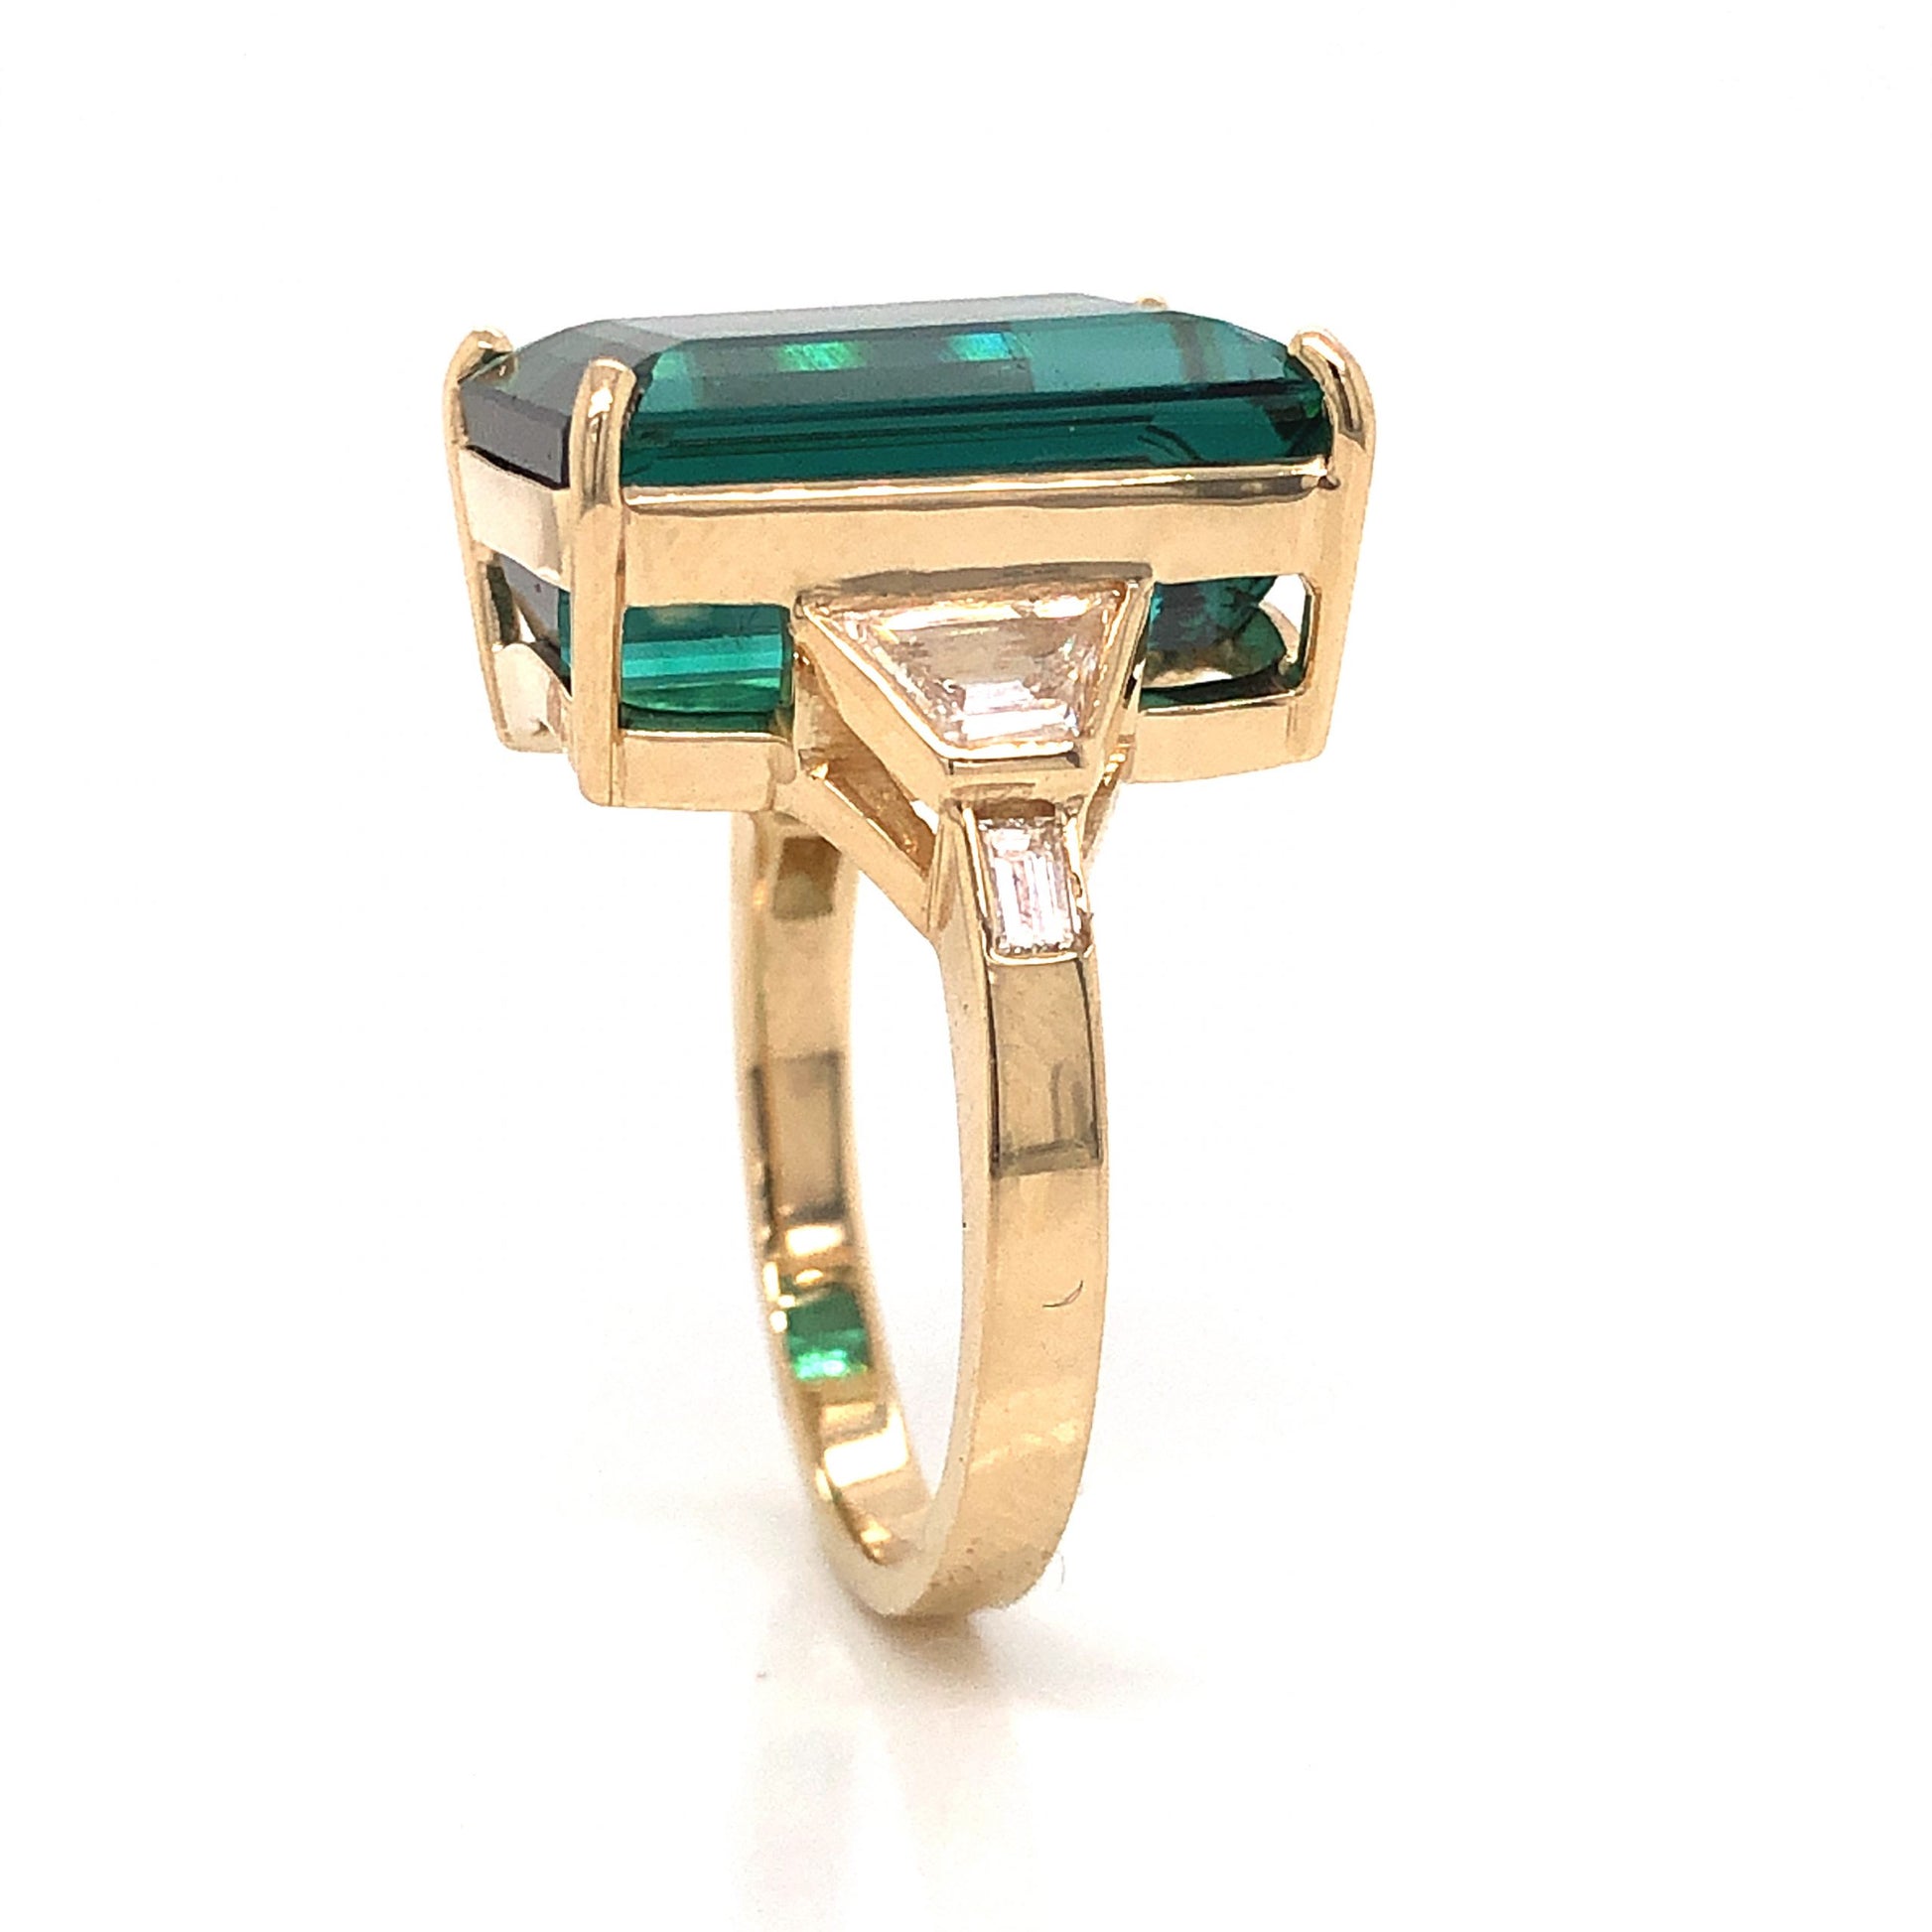 Indicolite Tourmaline & Diamond Cocktail Ring in 14k Yellow GoldComposition: PlatinumRing Size: 6.75Total Diamond Weight: .70 ctTotal Gram Weight: 8.1 gInscription: 14k